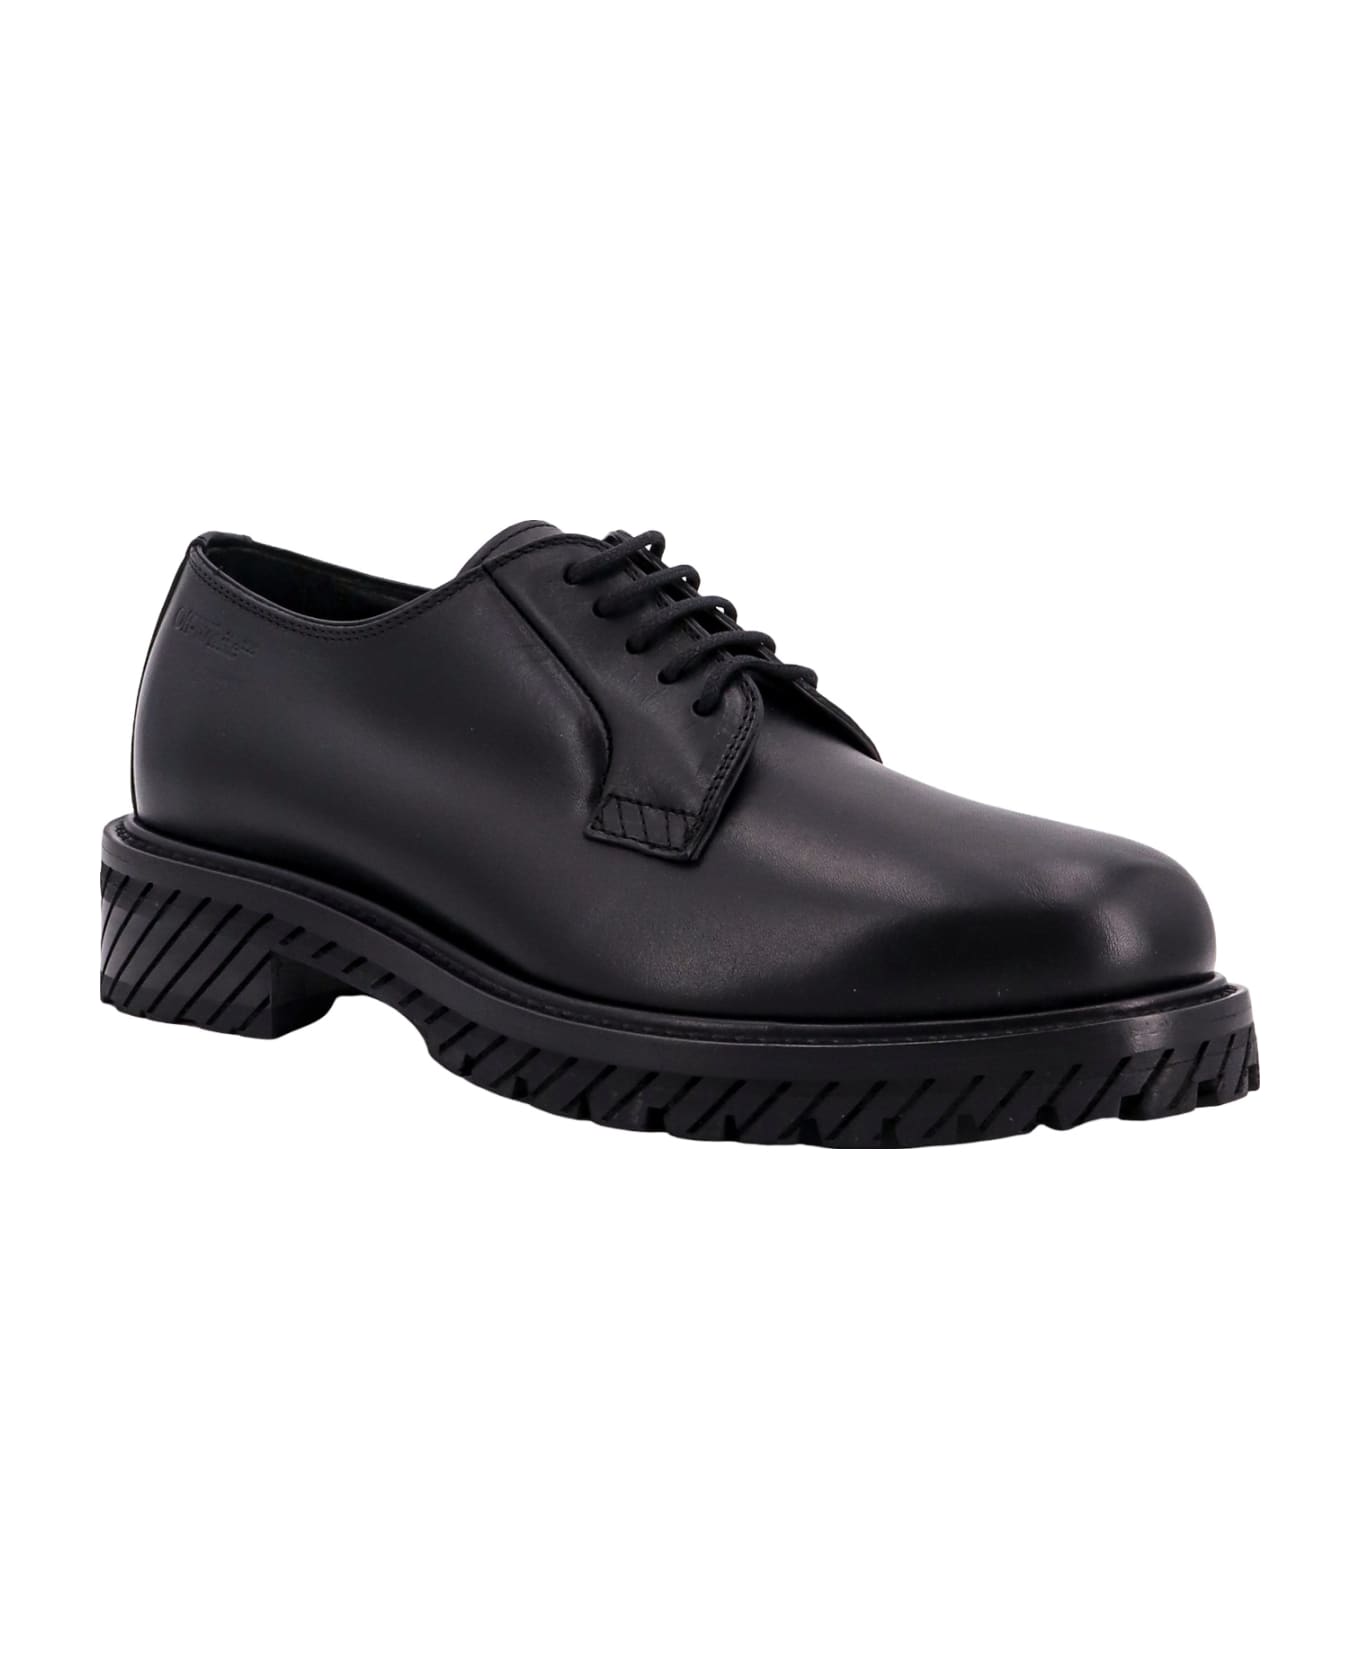 Off-White Military Derby Shoes - Black